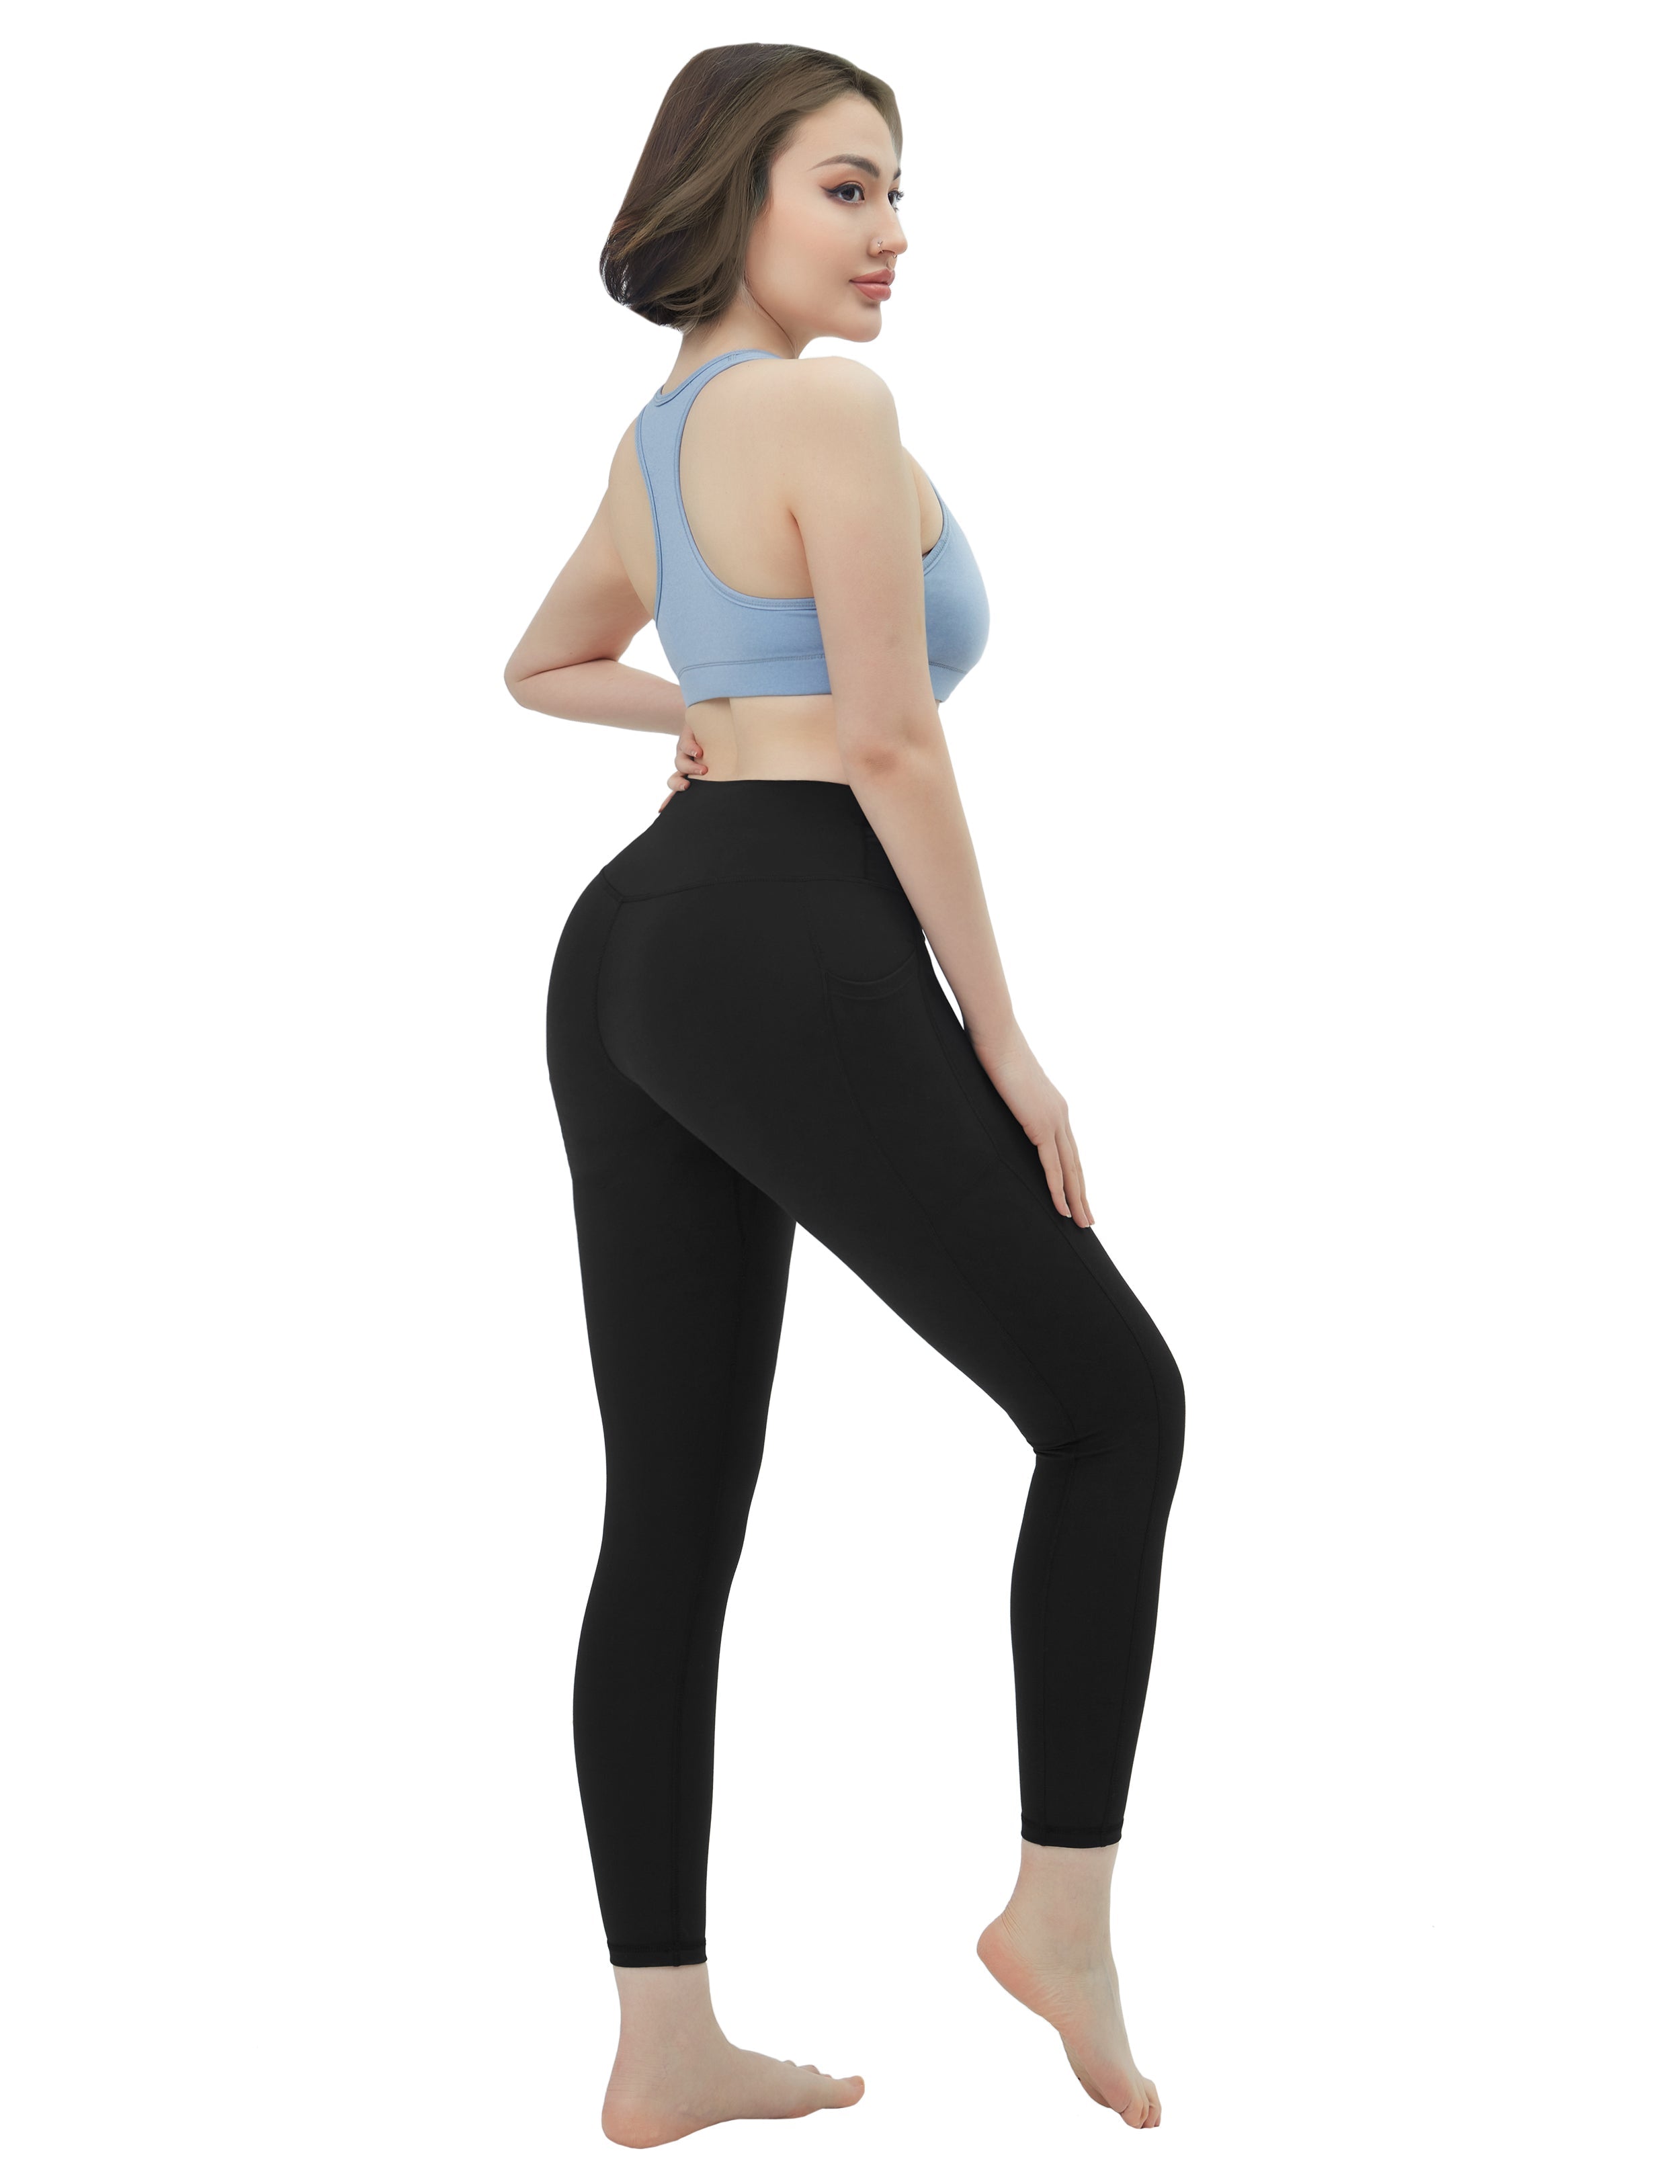 High Waisted Plus Size Pants 7/8 Length Leggings with Pockets black_Plus Size